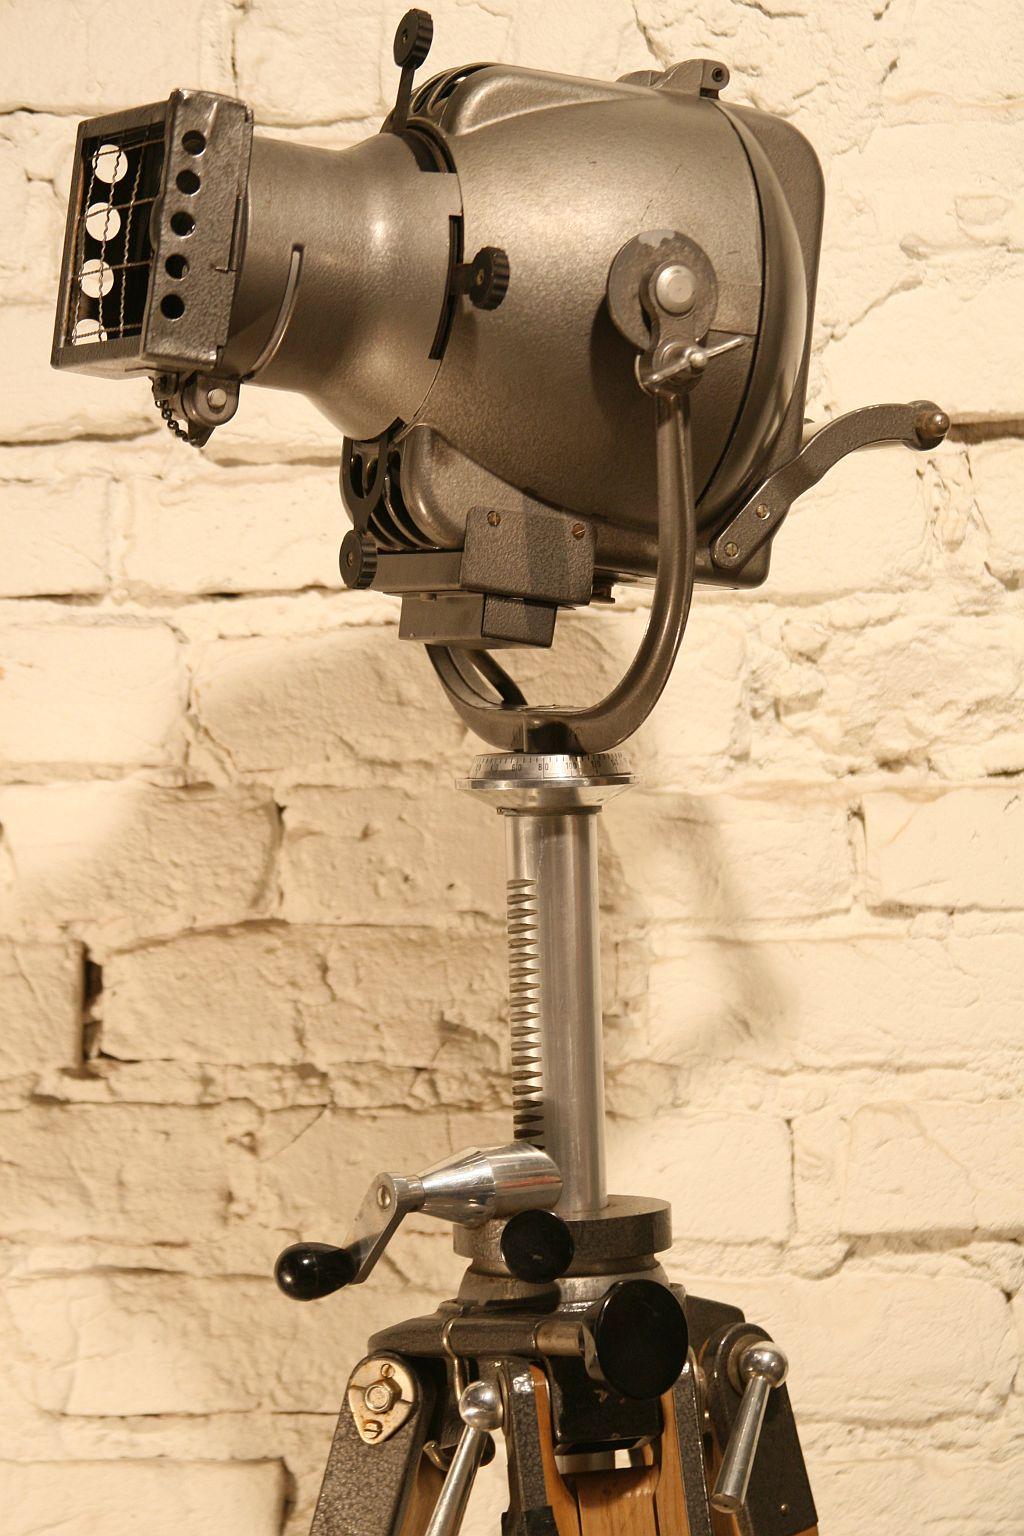 Strand electric theater and film spotlight from the 1950s
The original theater and film spotlight produced in the 1950s by the British company Strand Electric.
Construction:
Reflector body made of die-cast aluminum. The rear part of the body